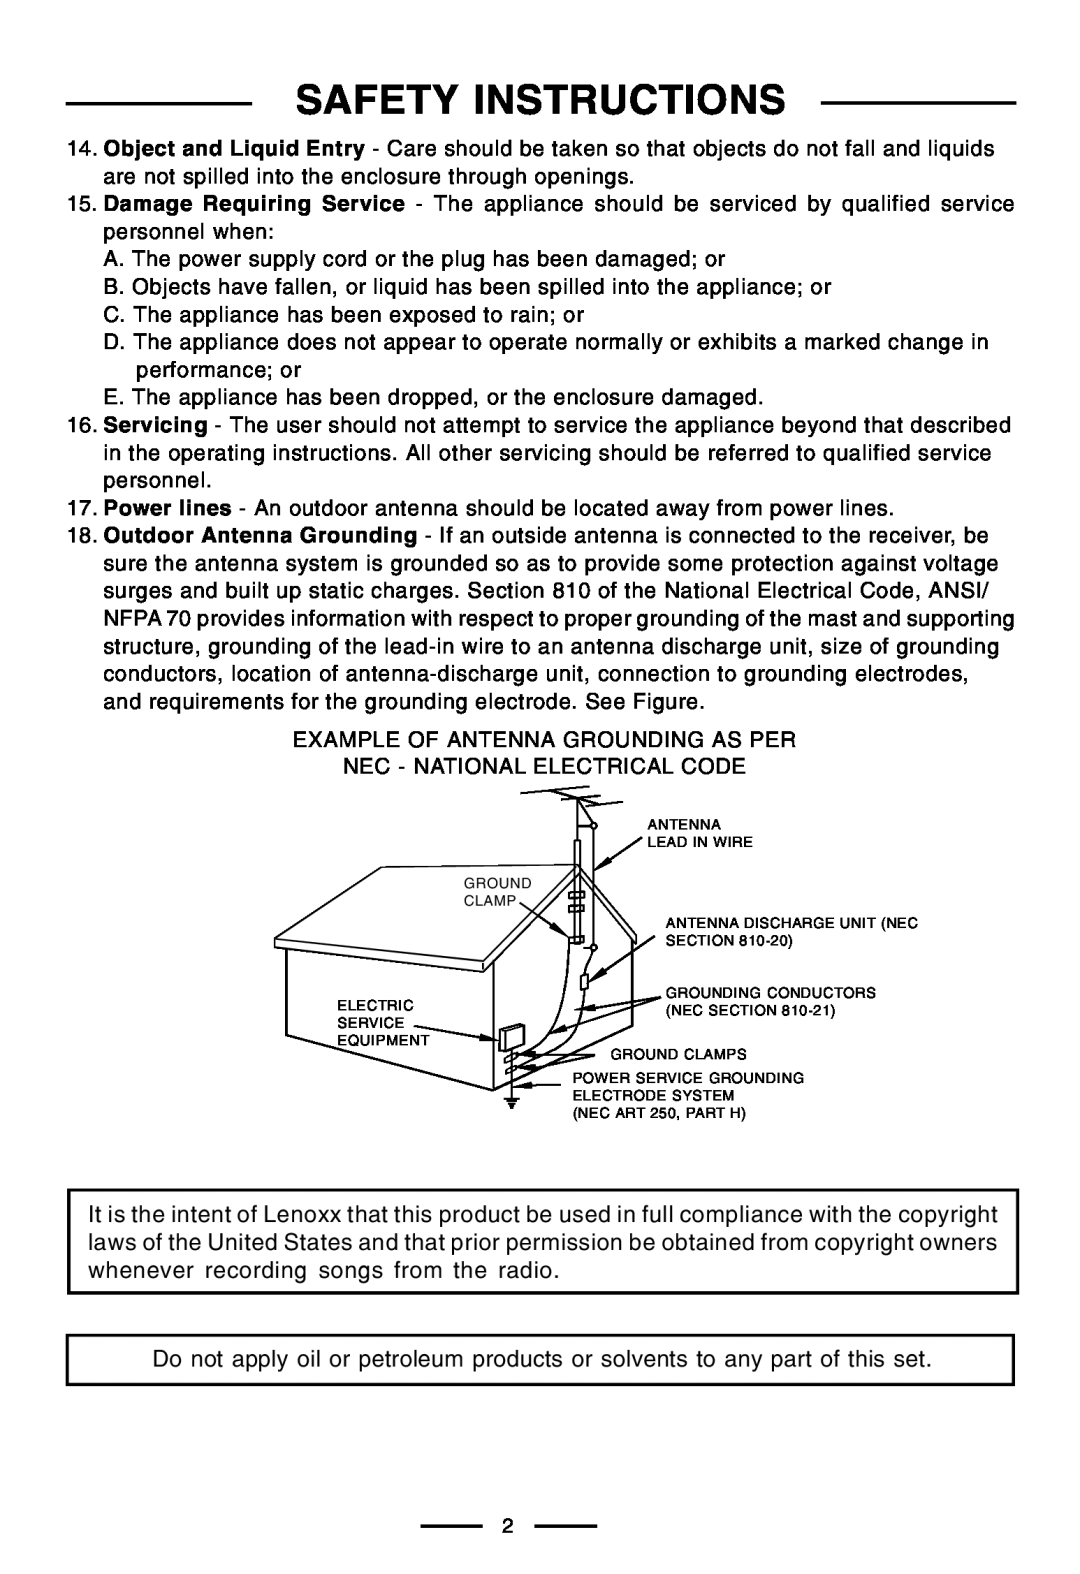 Lenoxx Electronics CT-99 operating instructions Safety Instructions, C.The appliance has been exposed to rain or 